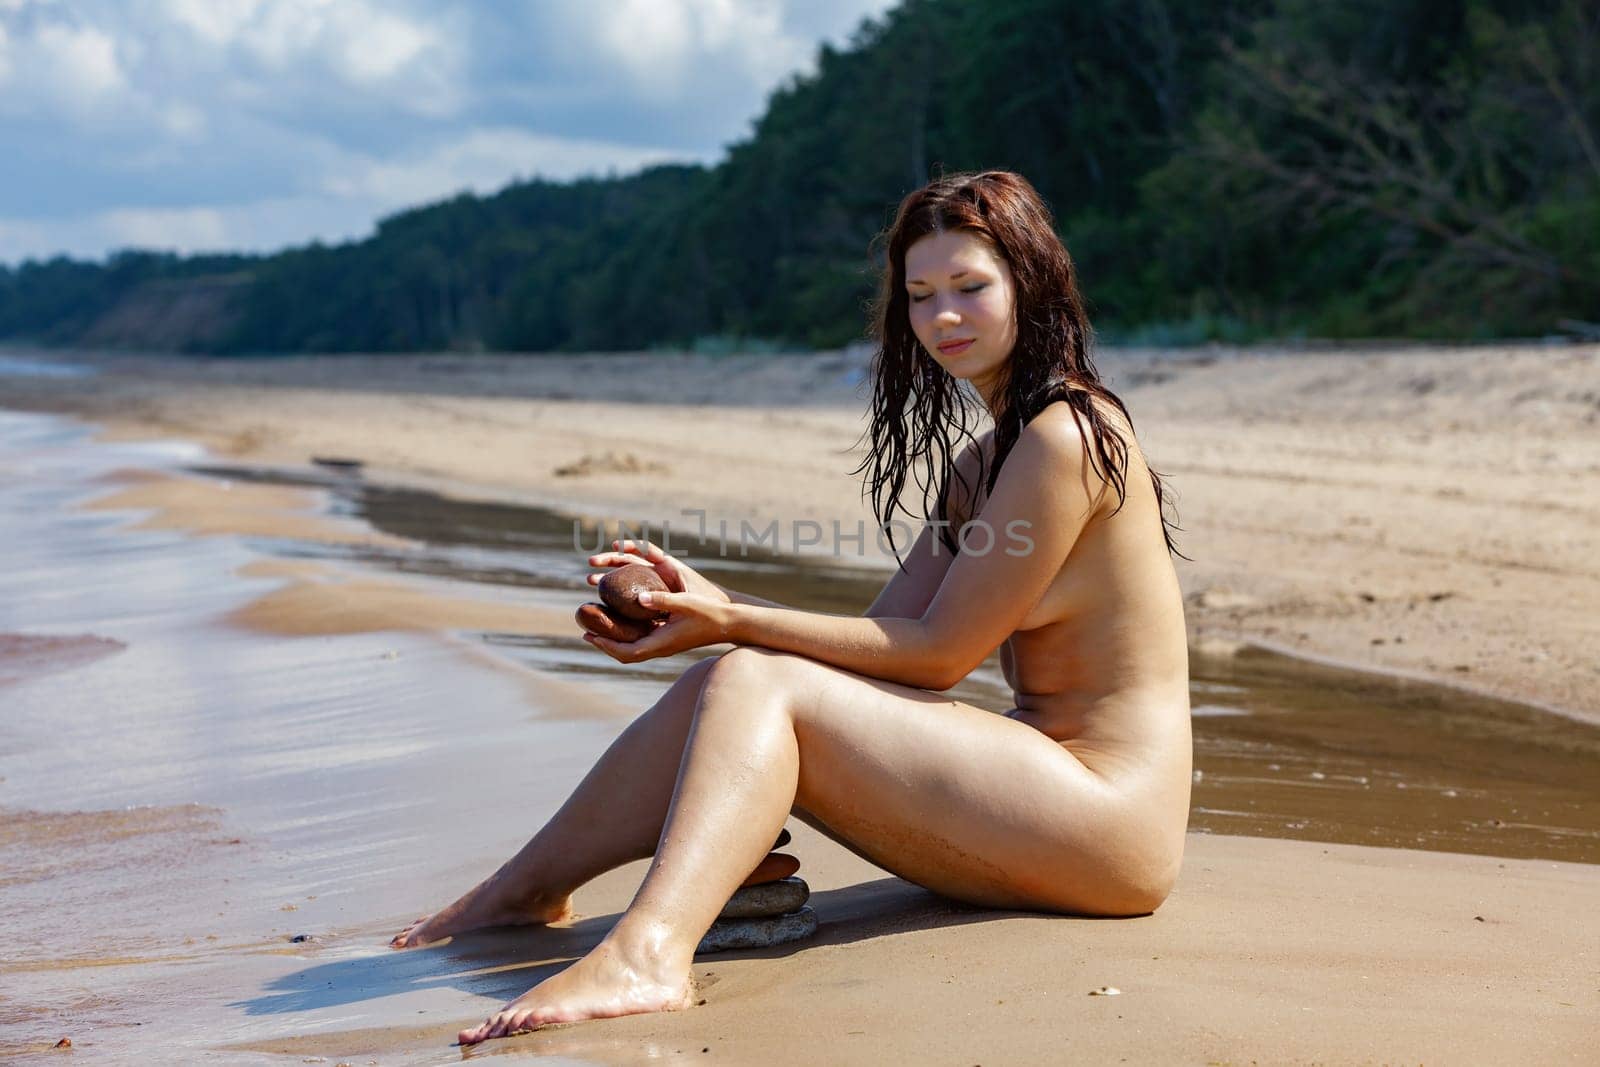 A young completely naked woman sunbathing on the beach, enjoying nature and solitude, building a pyramid out of small stones.